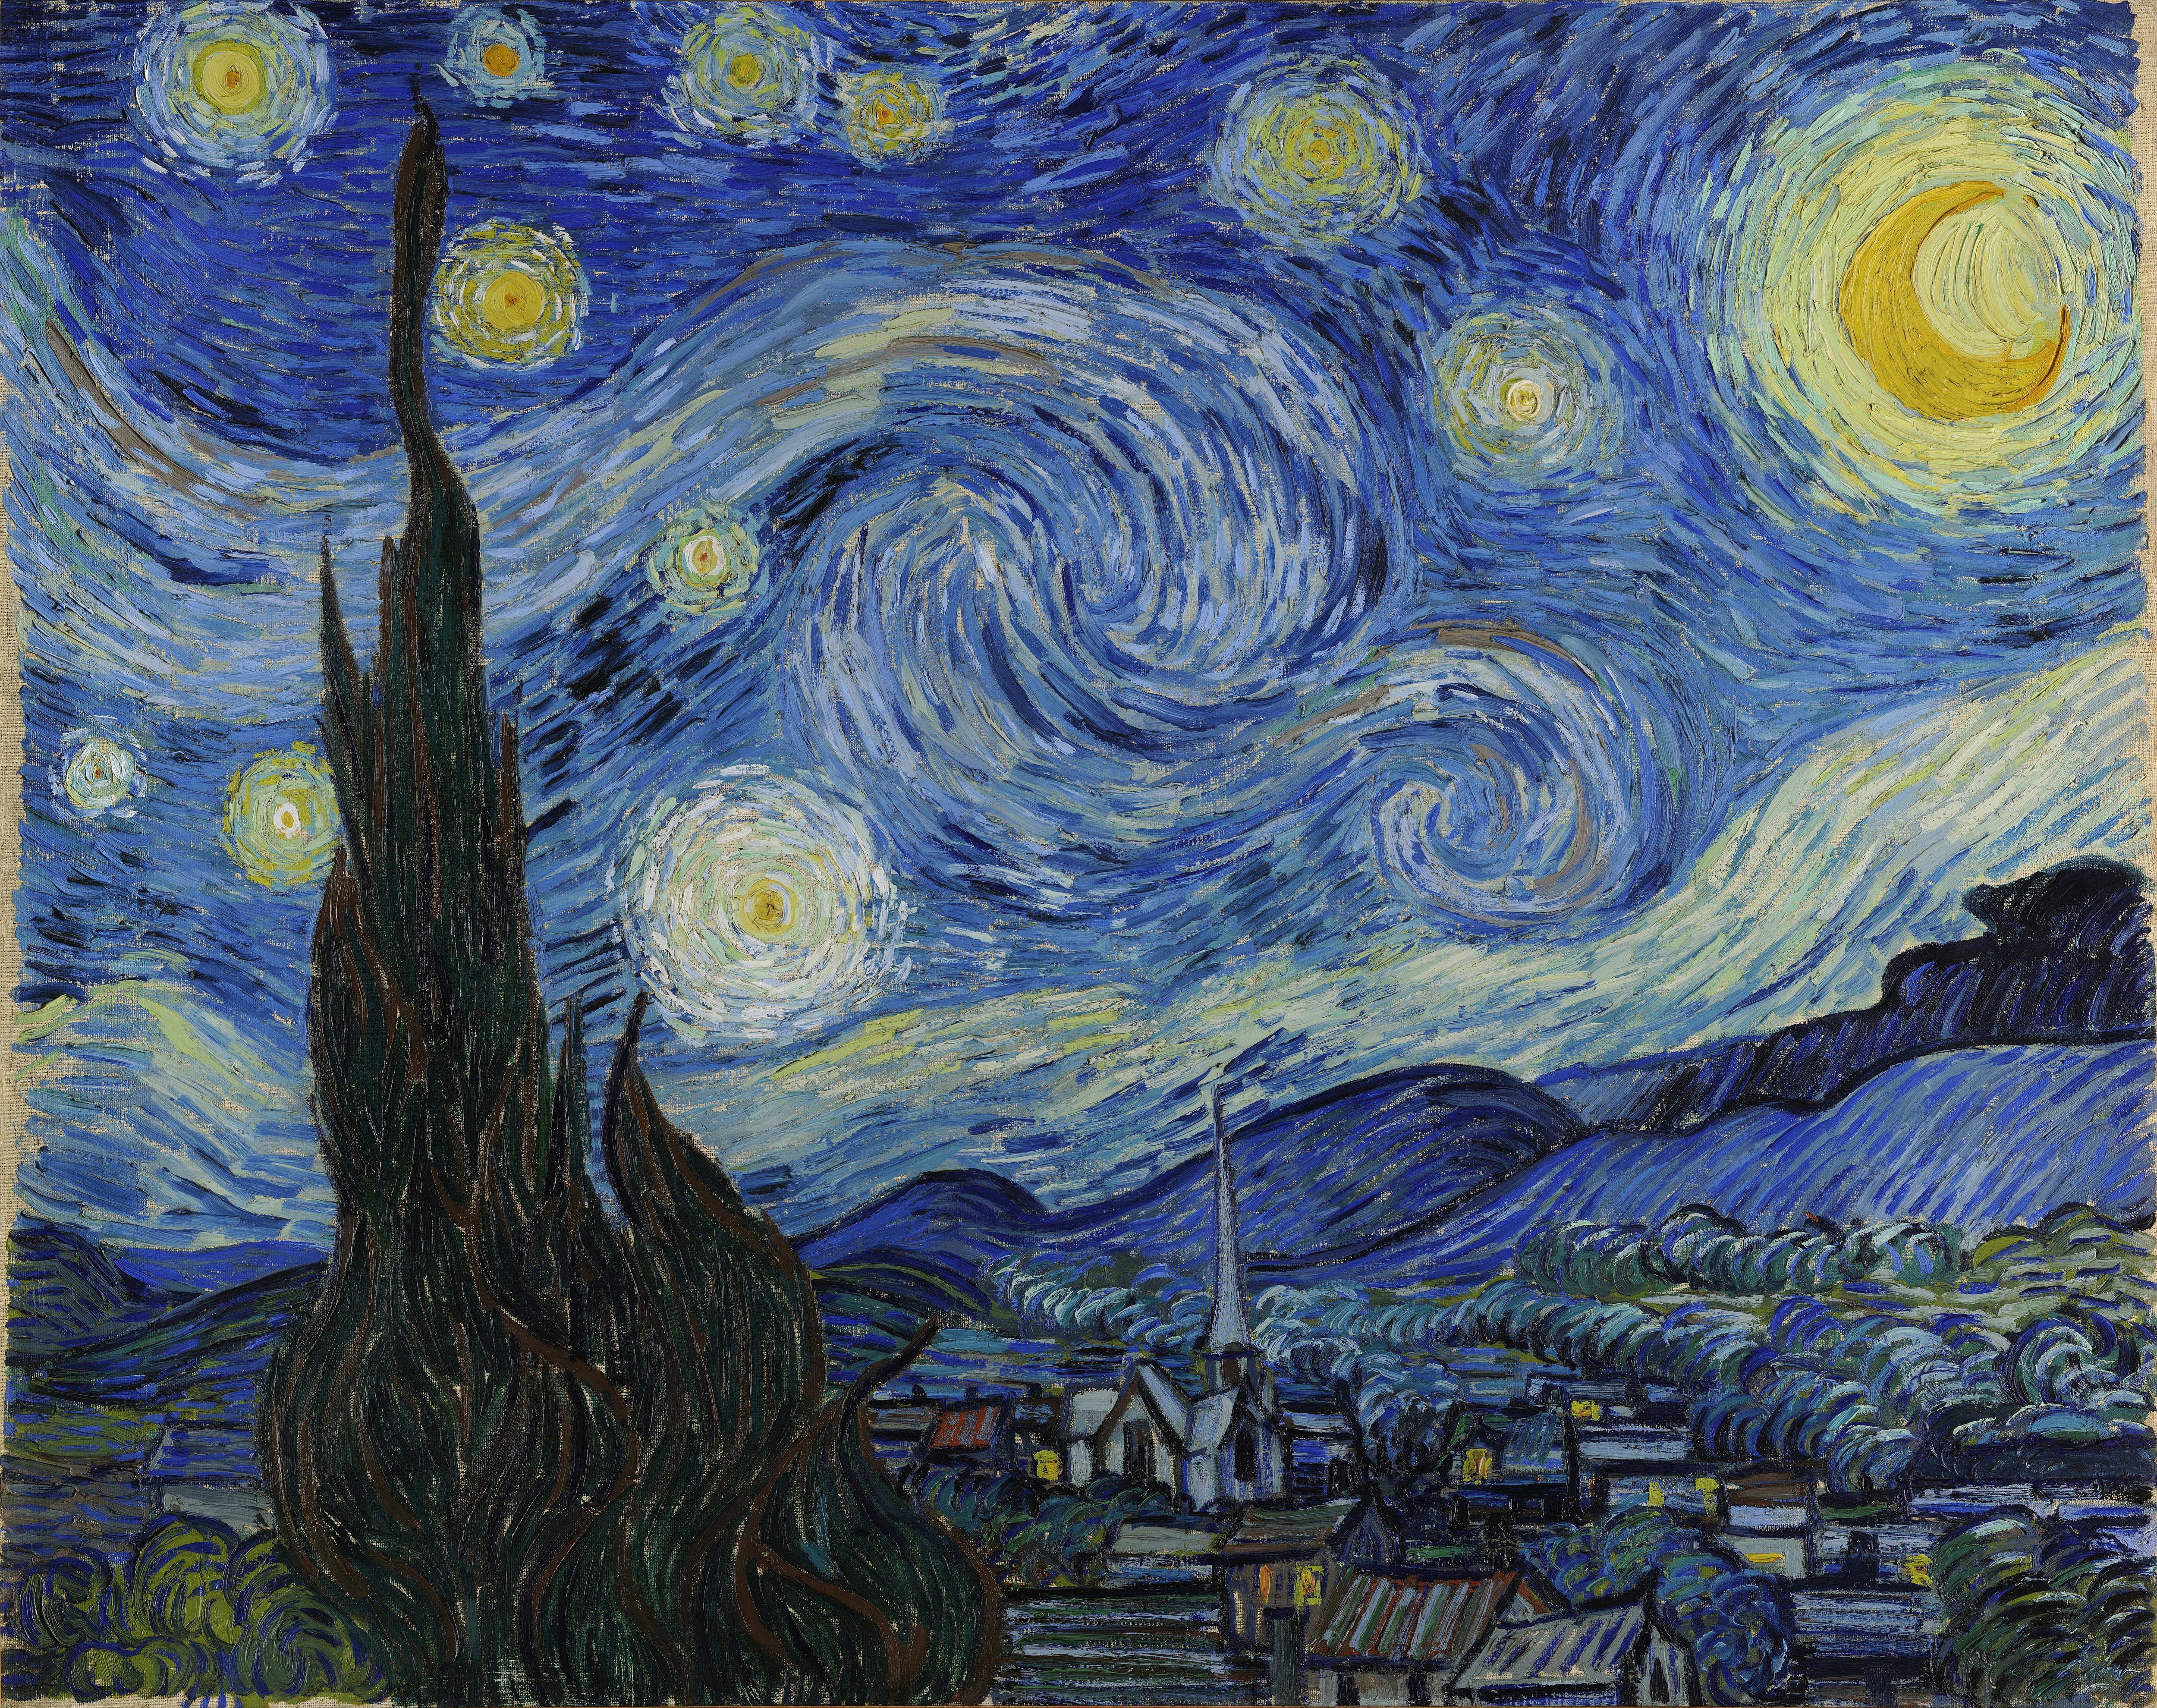 https://uploads3.wikiart.org/00142/images/vincent-van-gogh/the-starry-night.jpg